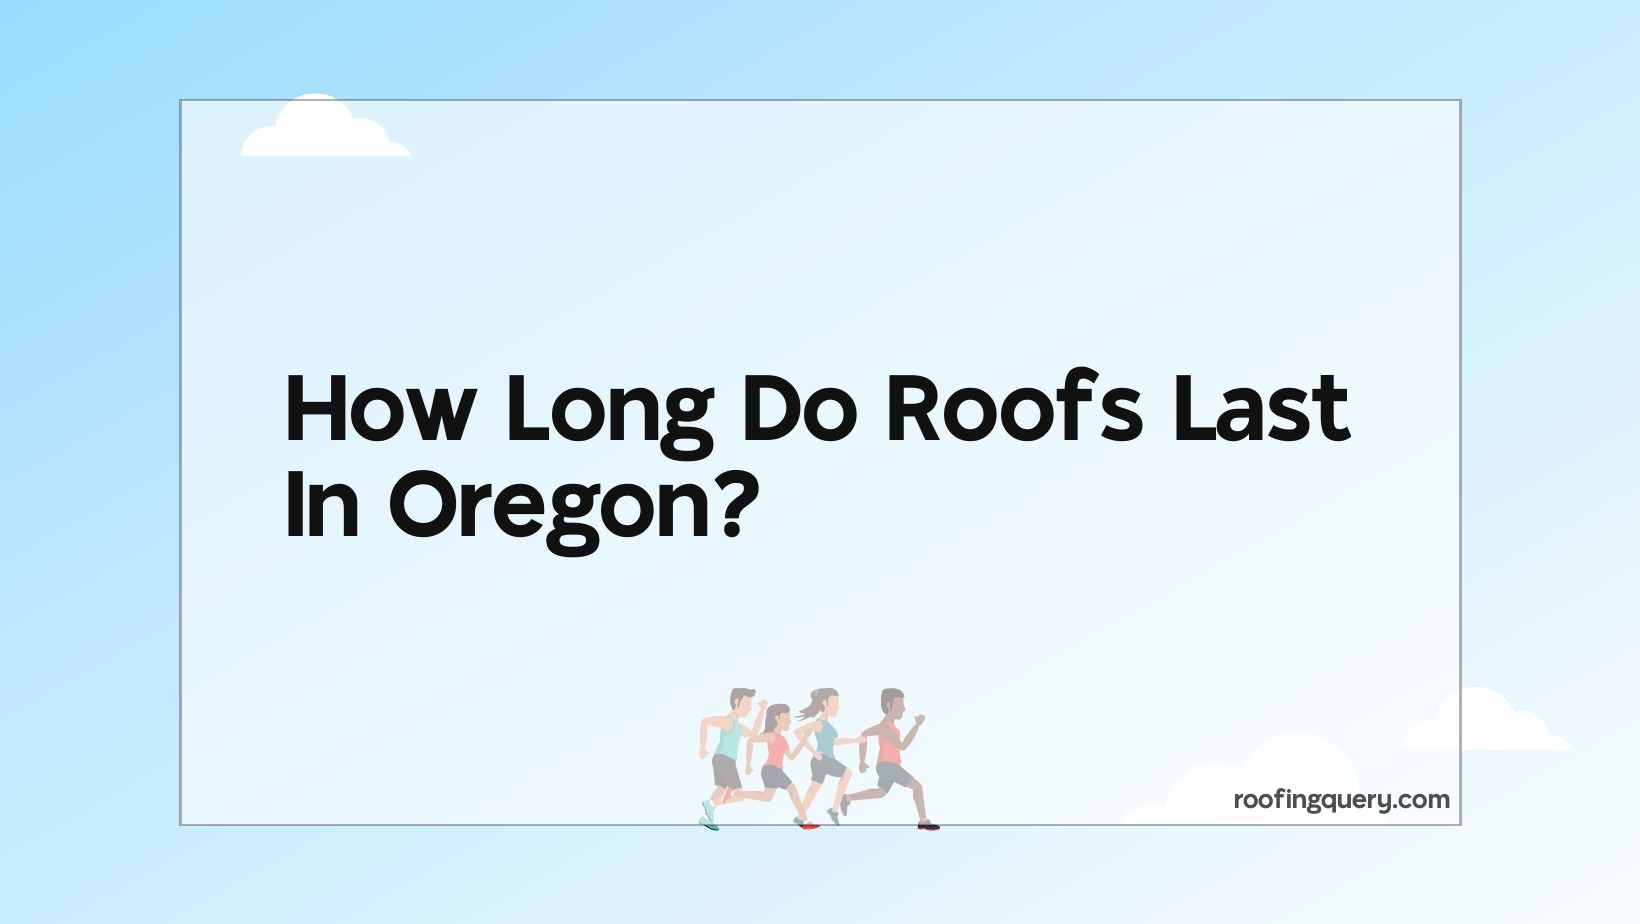 How Long Do Roofs Last In Oregon?